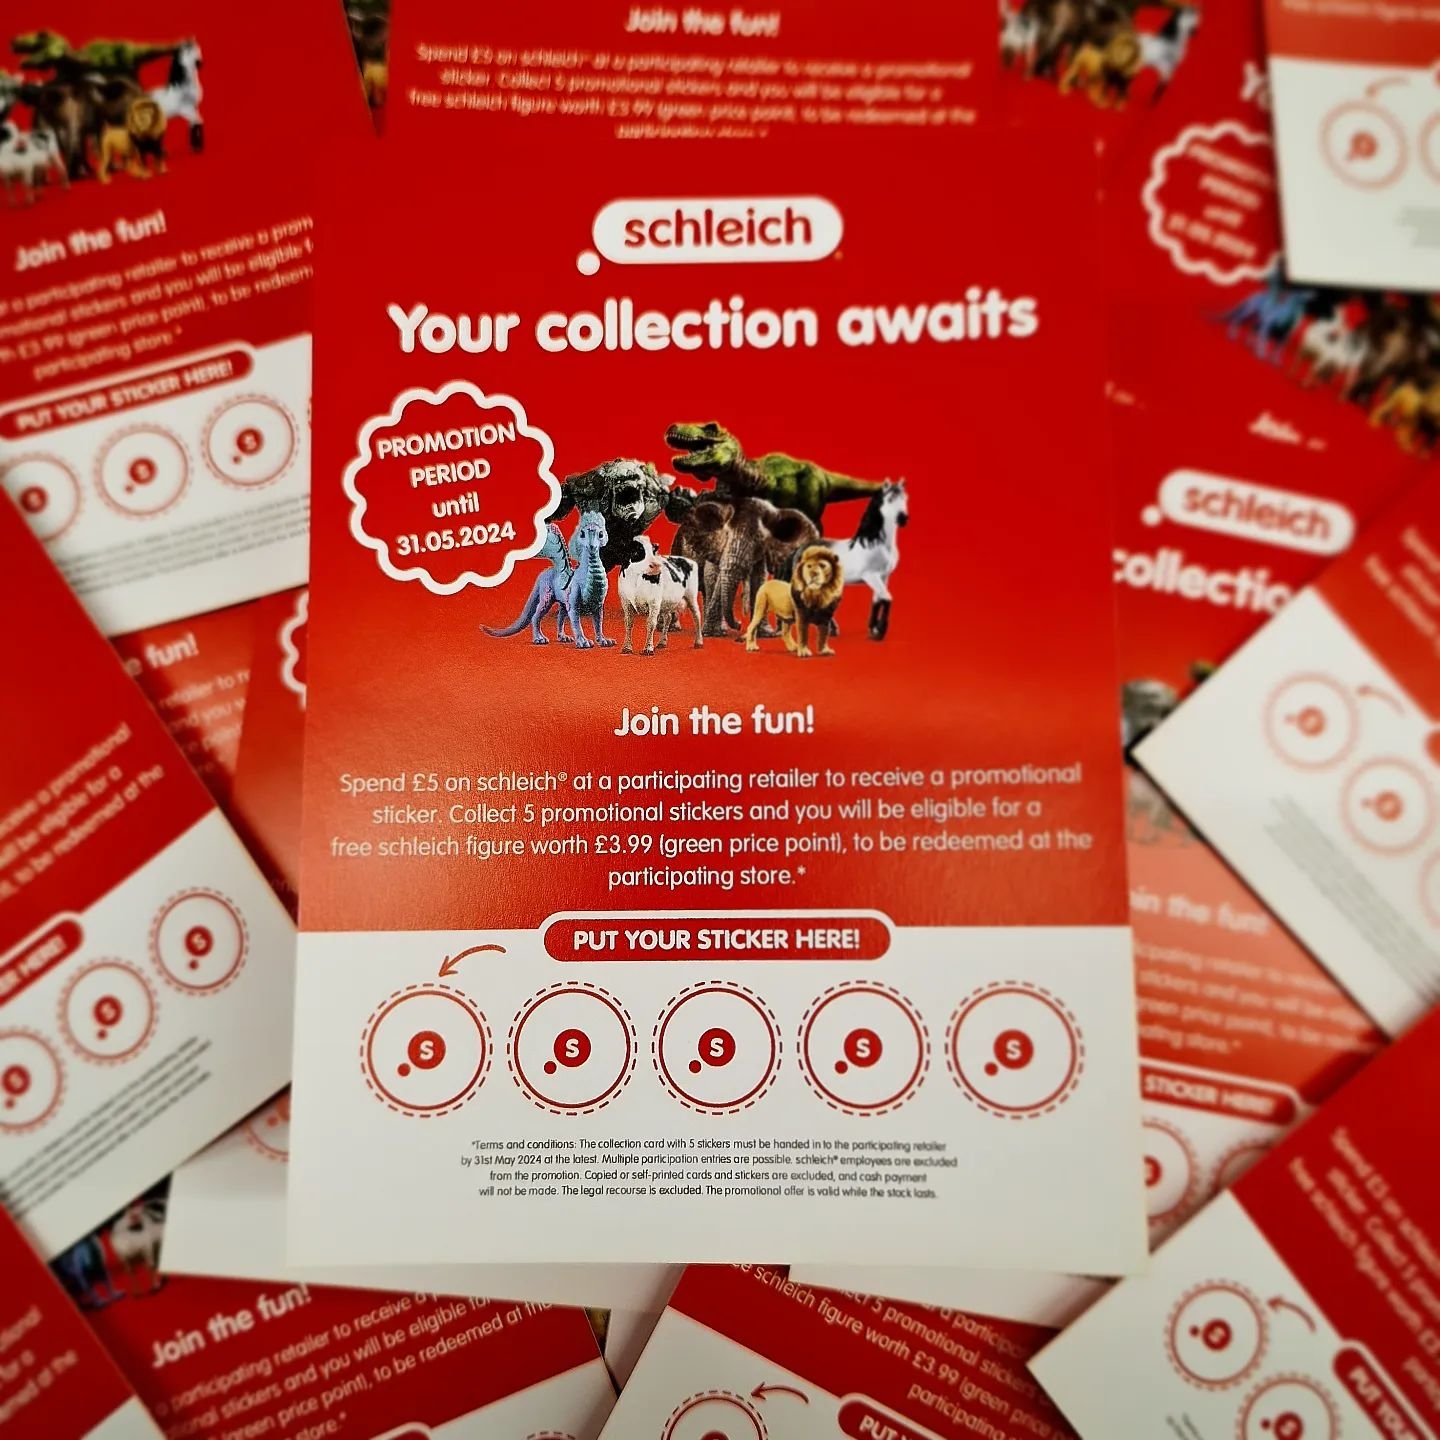 🦖🐎 SCHLEICH LOYALTY CARD🦍🐋

❤️Spend &pound;5 on any SCHLEICH and COLLECT a STICKER.

❤️5 STICKERS = One FREE 🟢GREEN DOT🟢 SCHLEICH FIGURE FOR FREE (worth &pound;3.99).

Pop in for more details &amp; to see our full range of @schleichofficial. 

